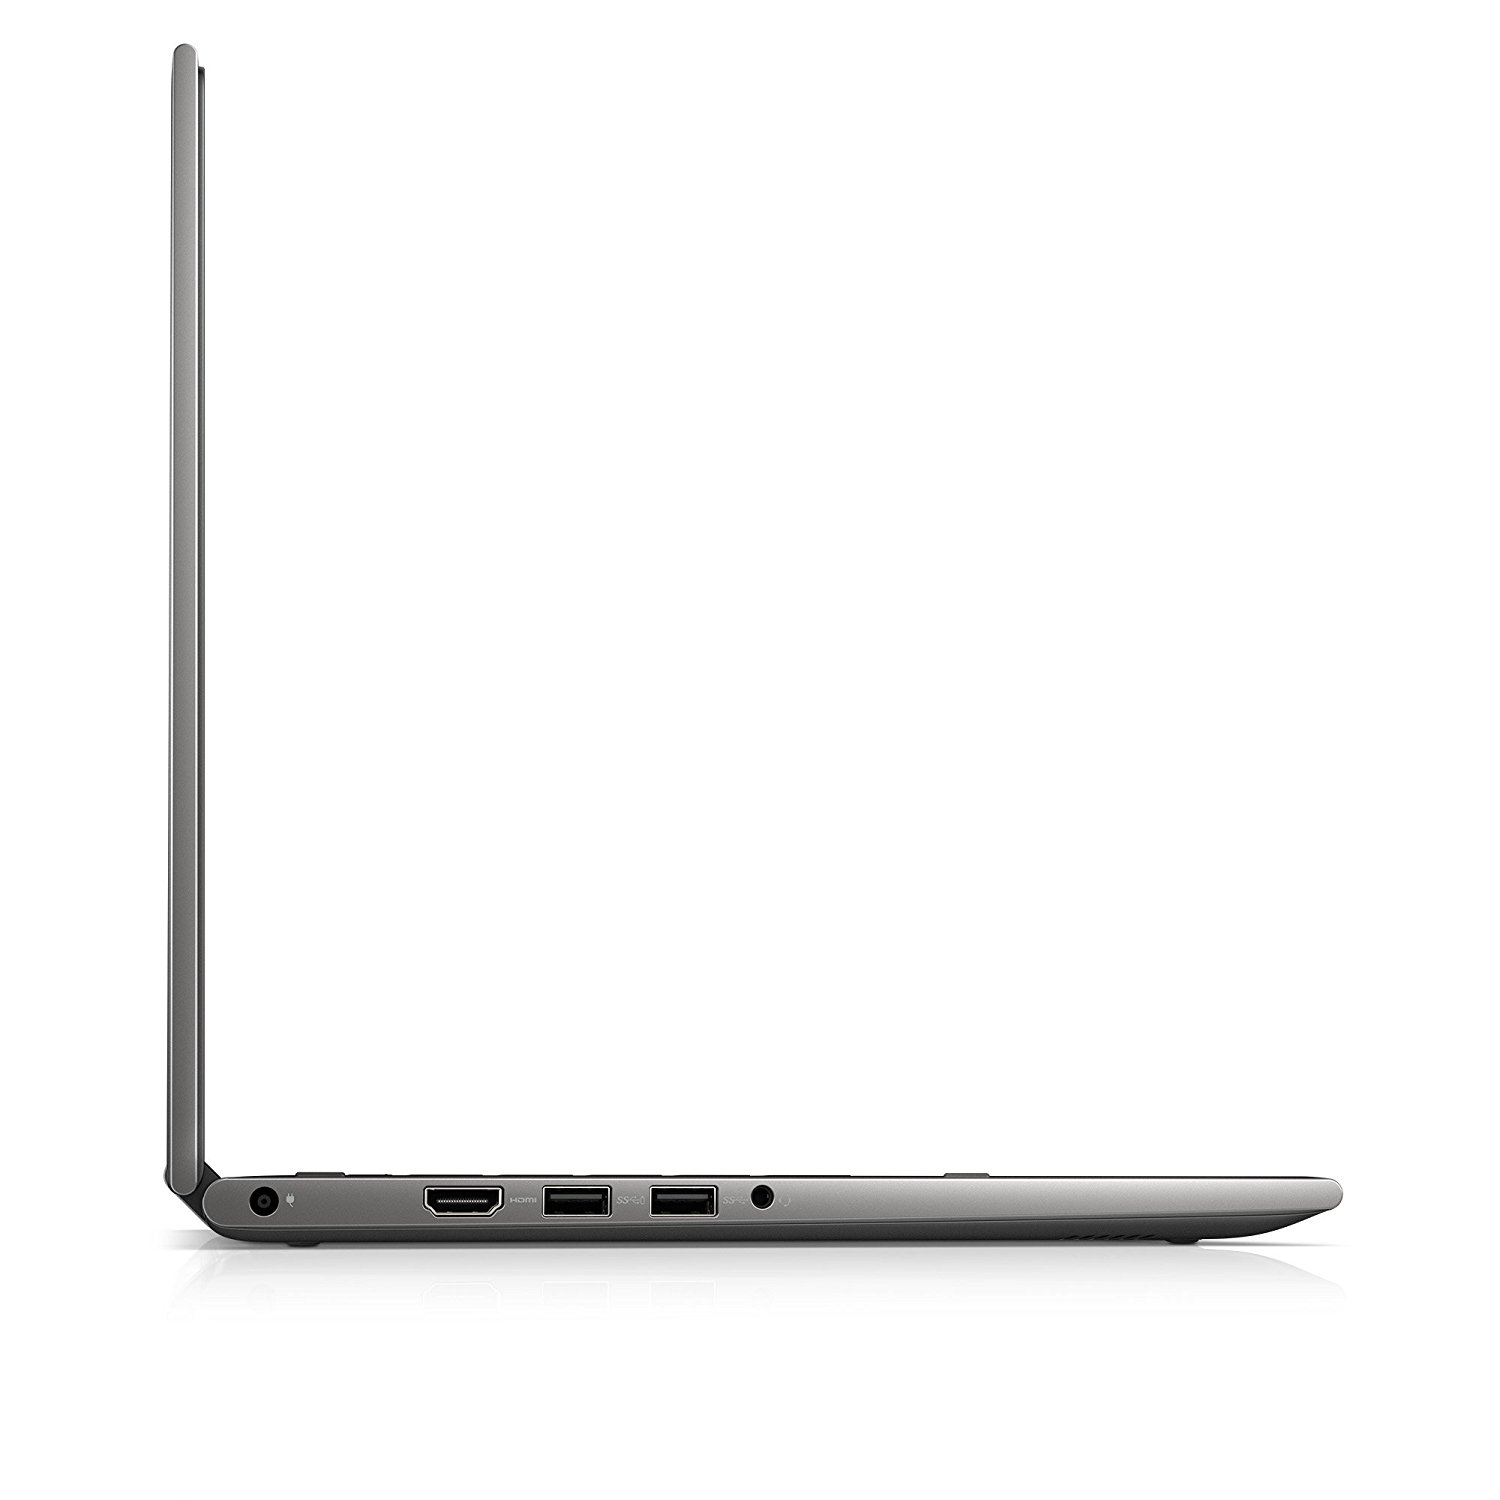 Dell Inspiron 5000 2-in-1 Laptop